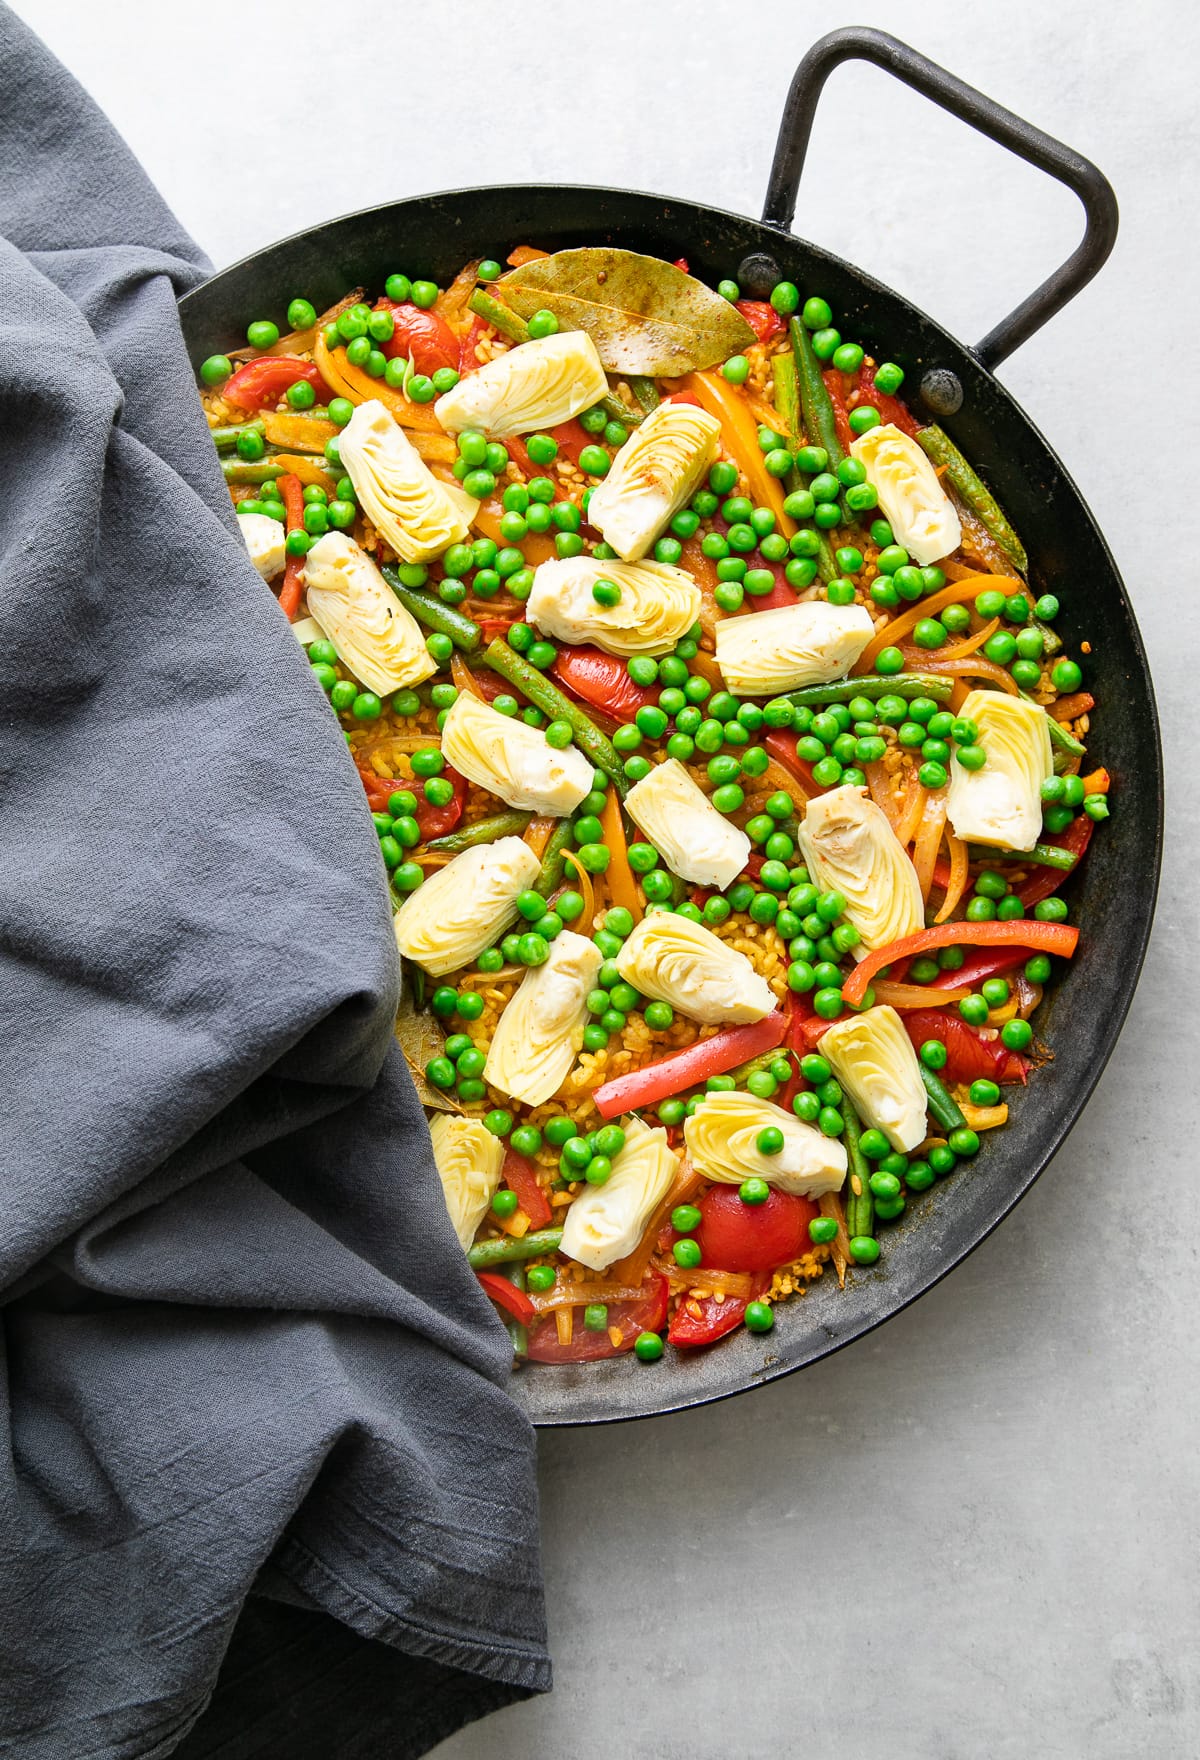 top down view showing veg broth poured over rice and veggies in paella pan.